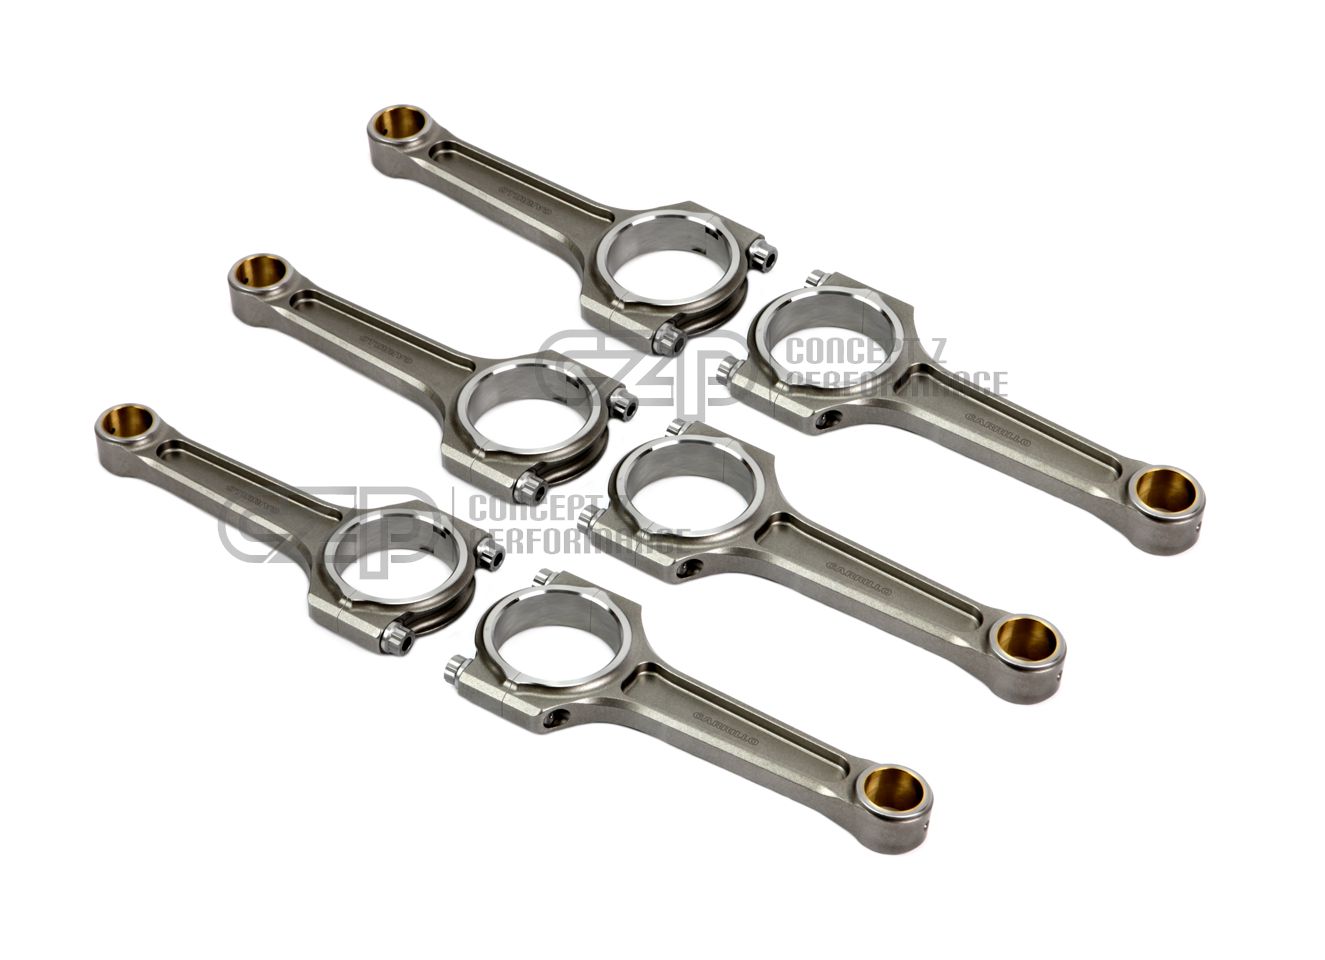 Carrillo Pro-H Connecting Rods w/ 3/8 CARR Fastening Bolts, RB25DET RB26DETT  - Nissan Skyline GTS GT-R R32 R33 R34